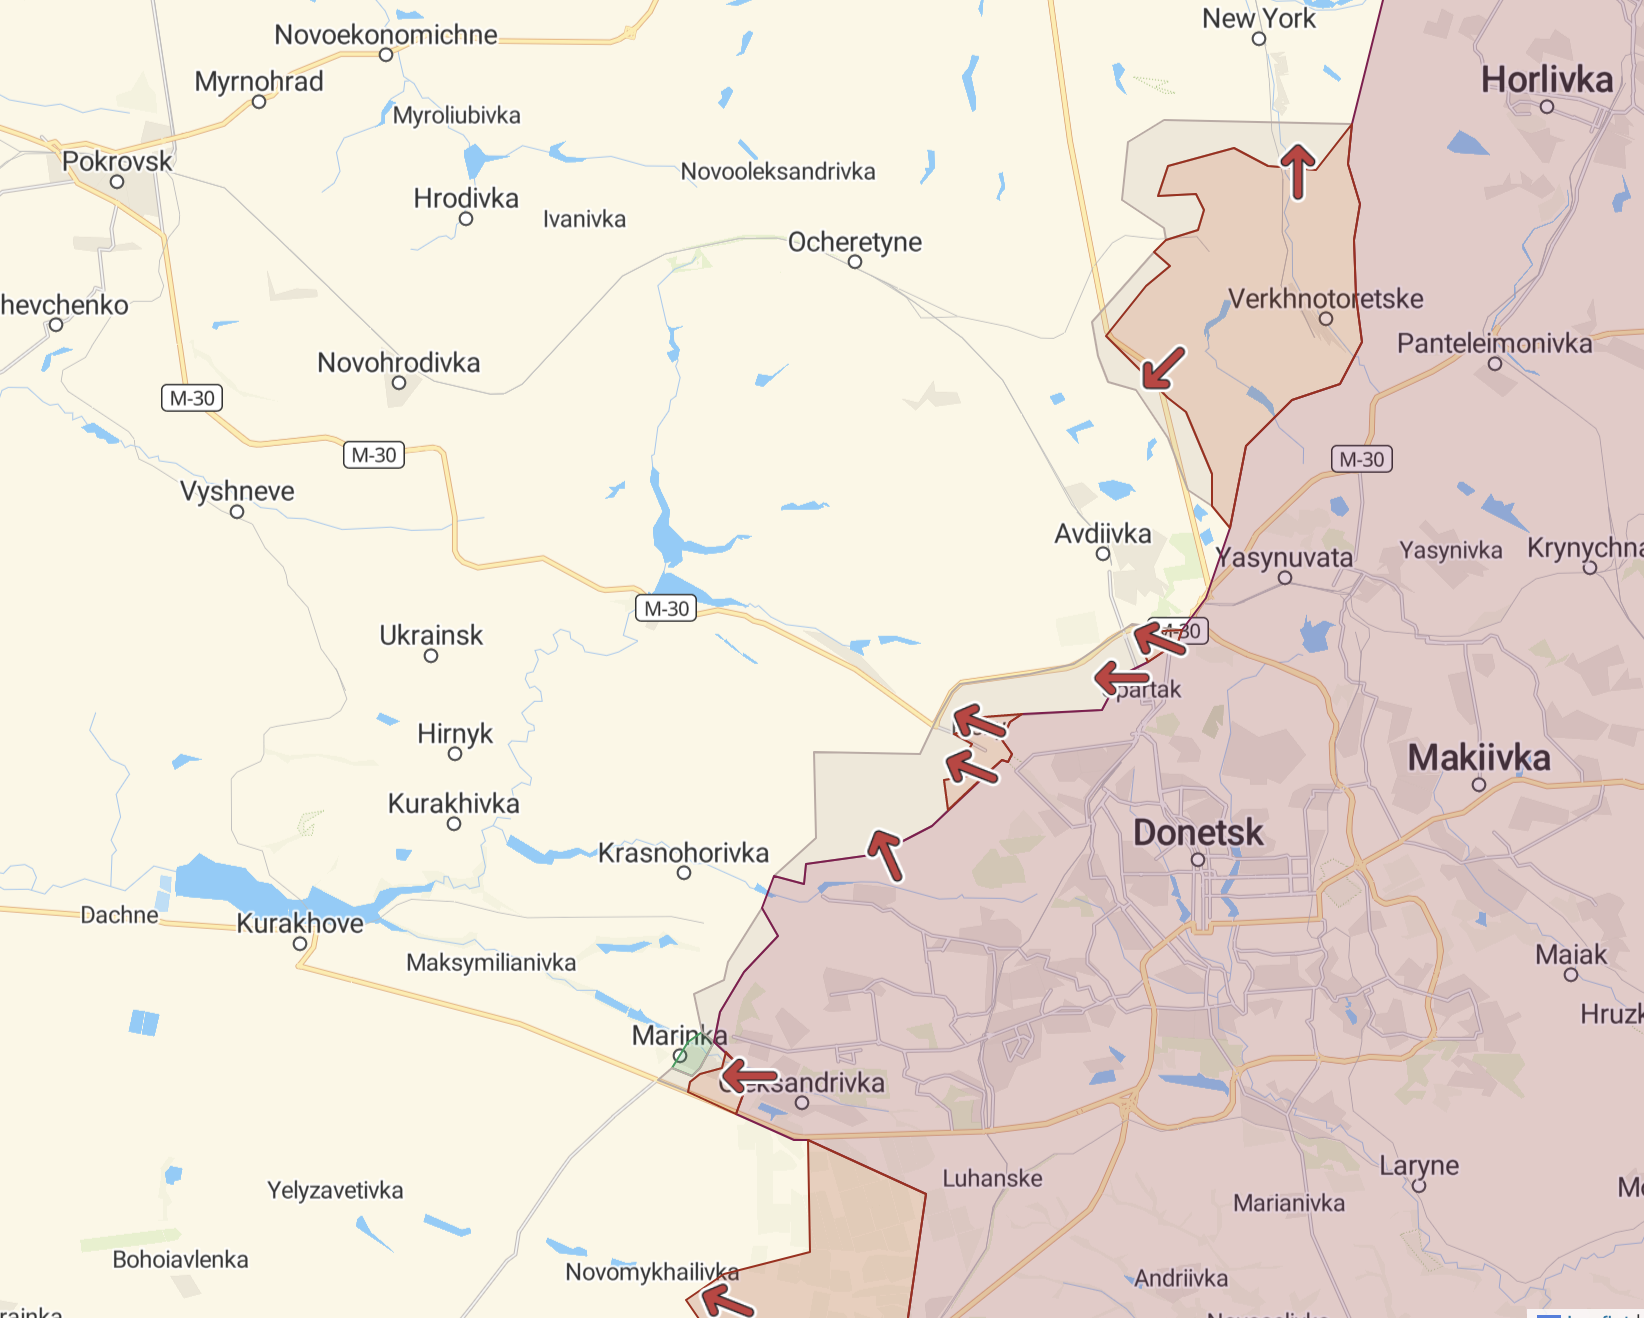 Situation in the south of Donetsk Oblast as of 25 August 2022. Map: DeepState ~